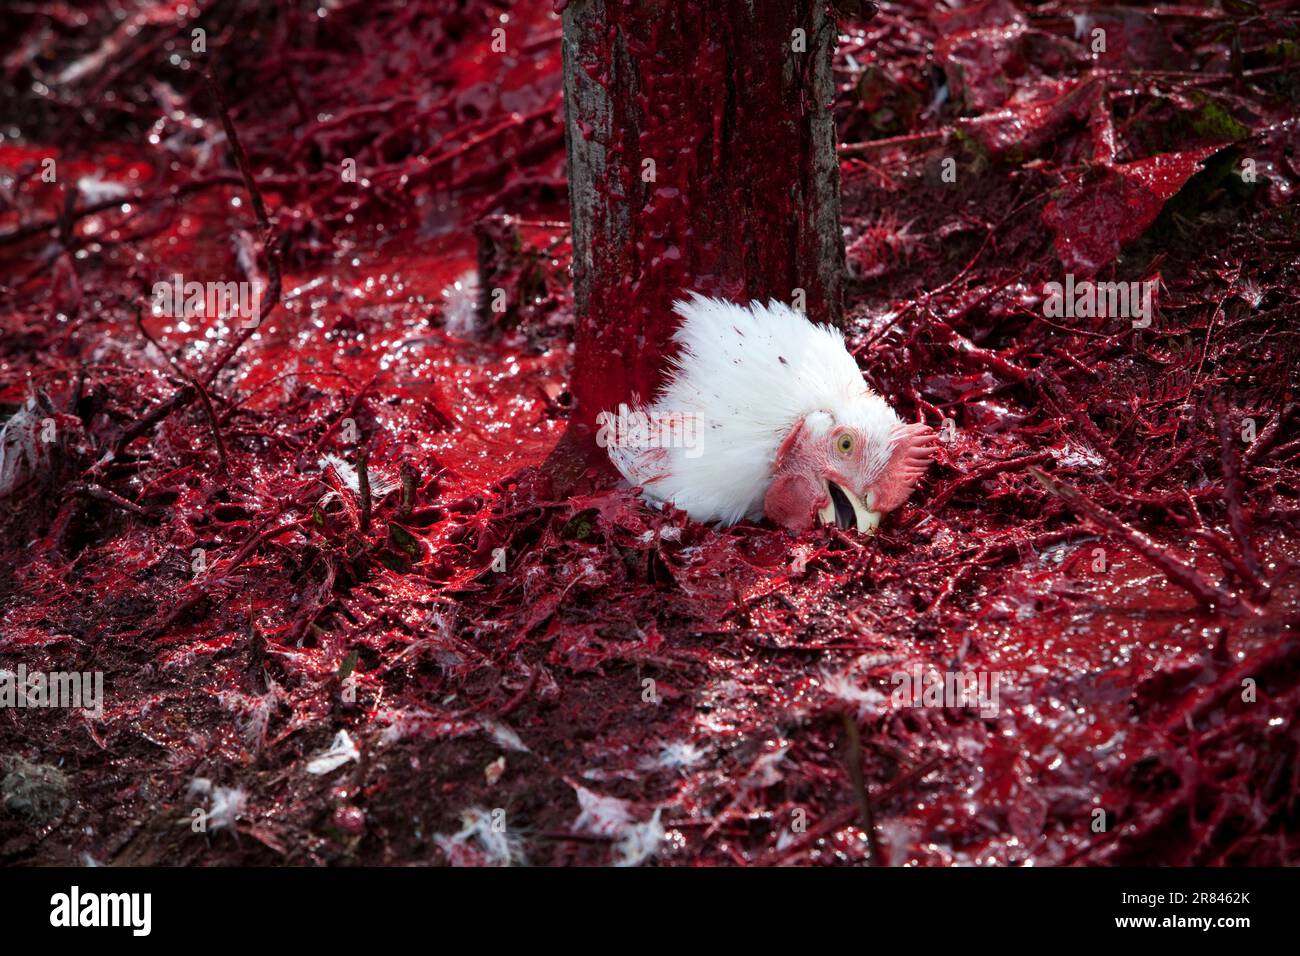 Salmon Arm, BC - The head of a chicken lies in a pool of blood at the bottom of a post during food-prep slaughter at a local farm. Stock Photo